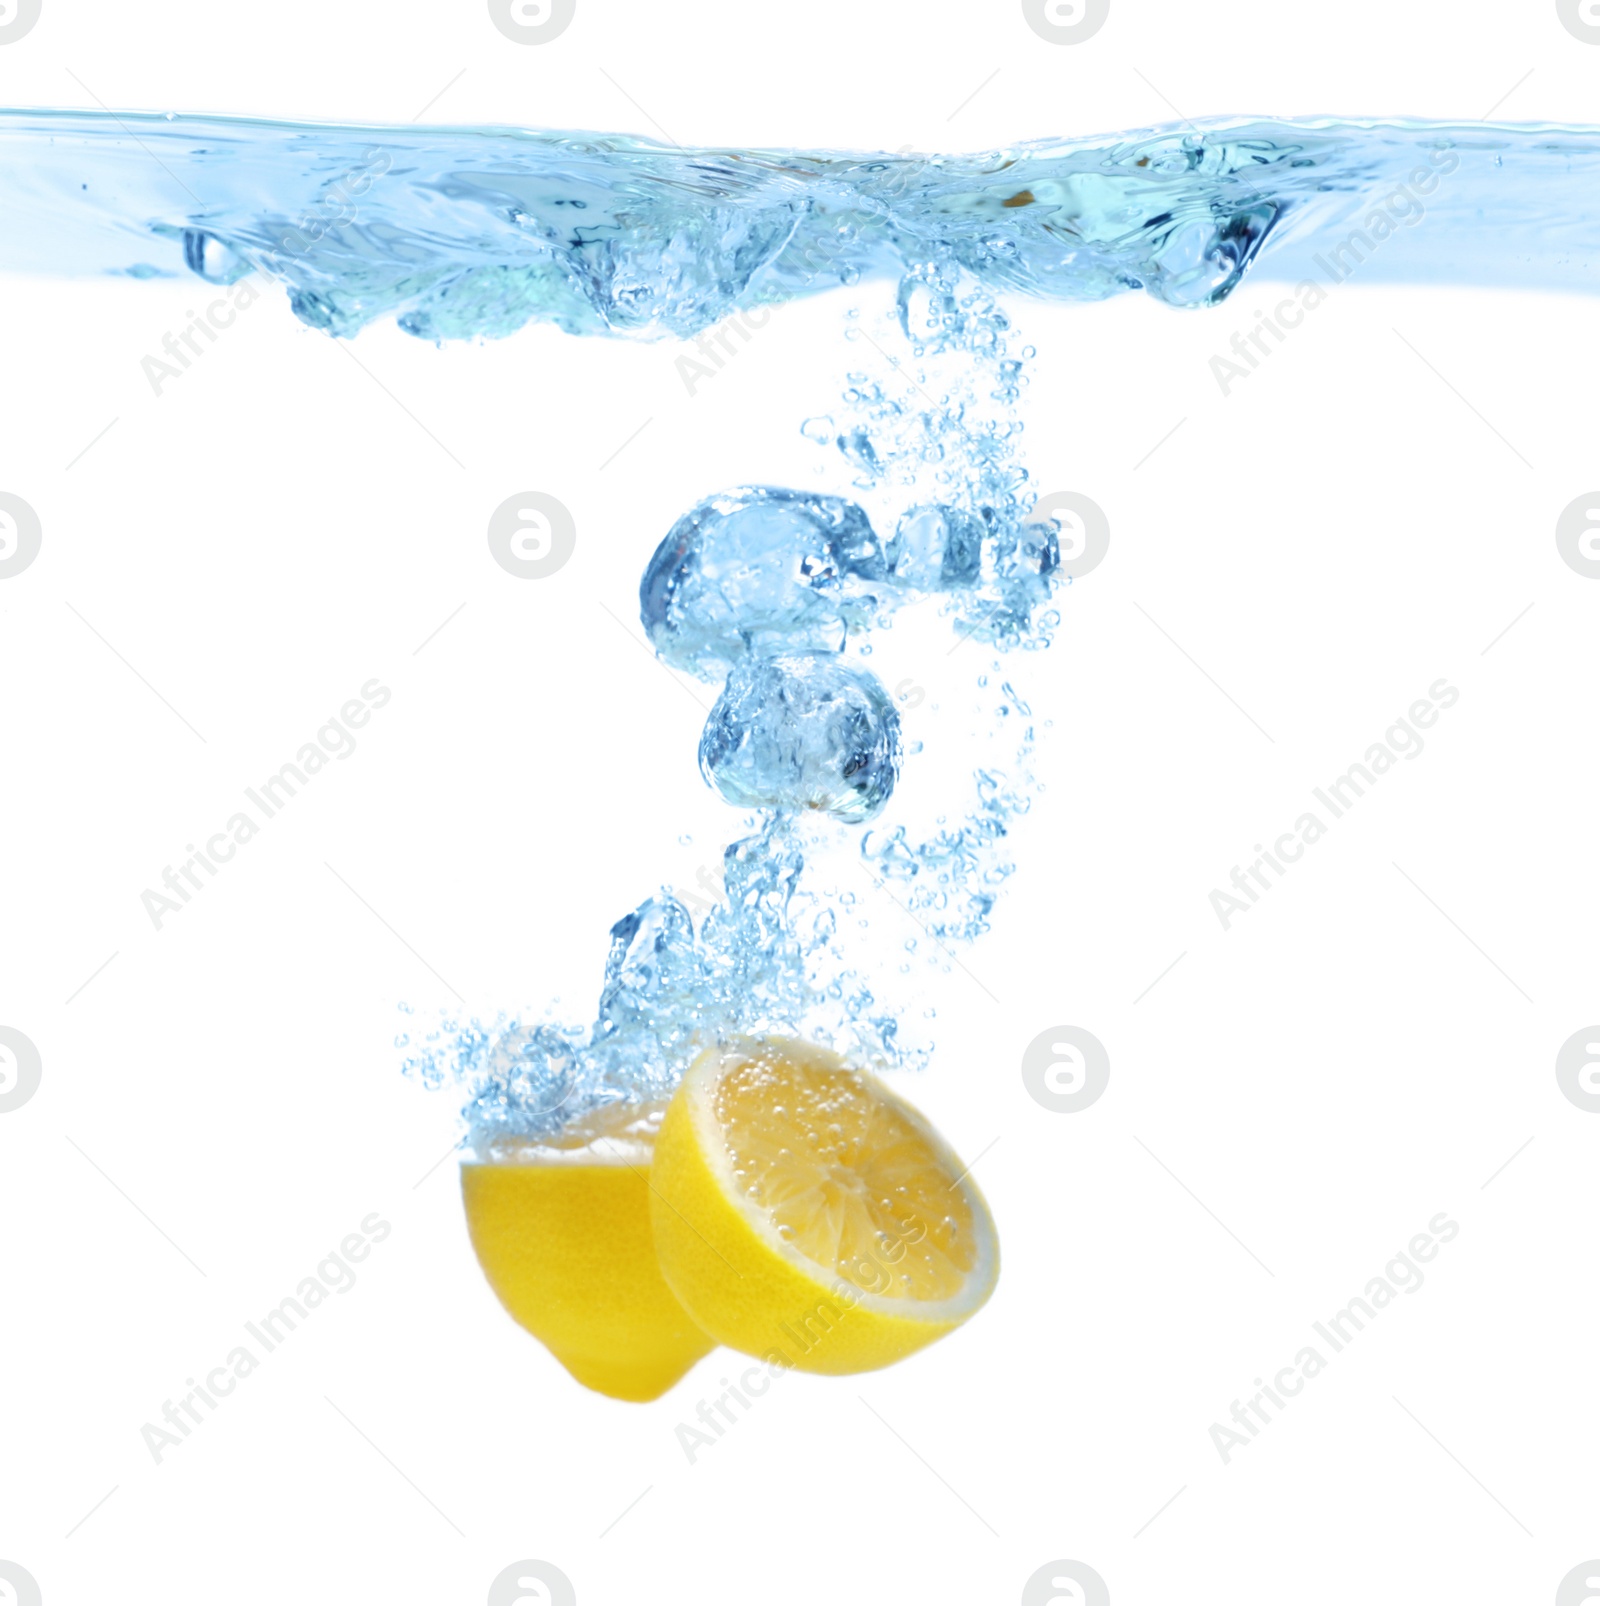 Photo of Cut lemon falling down into clear water against white background